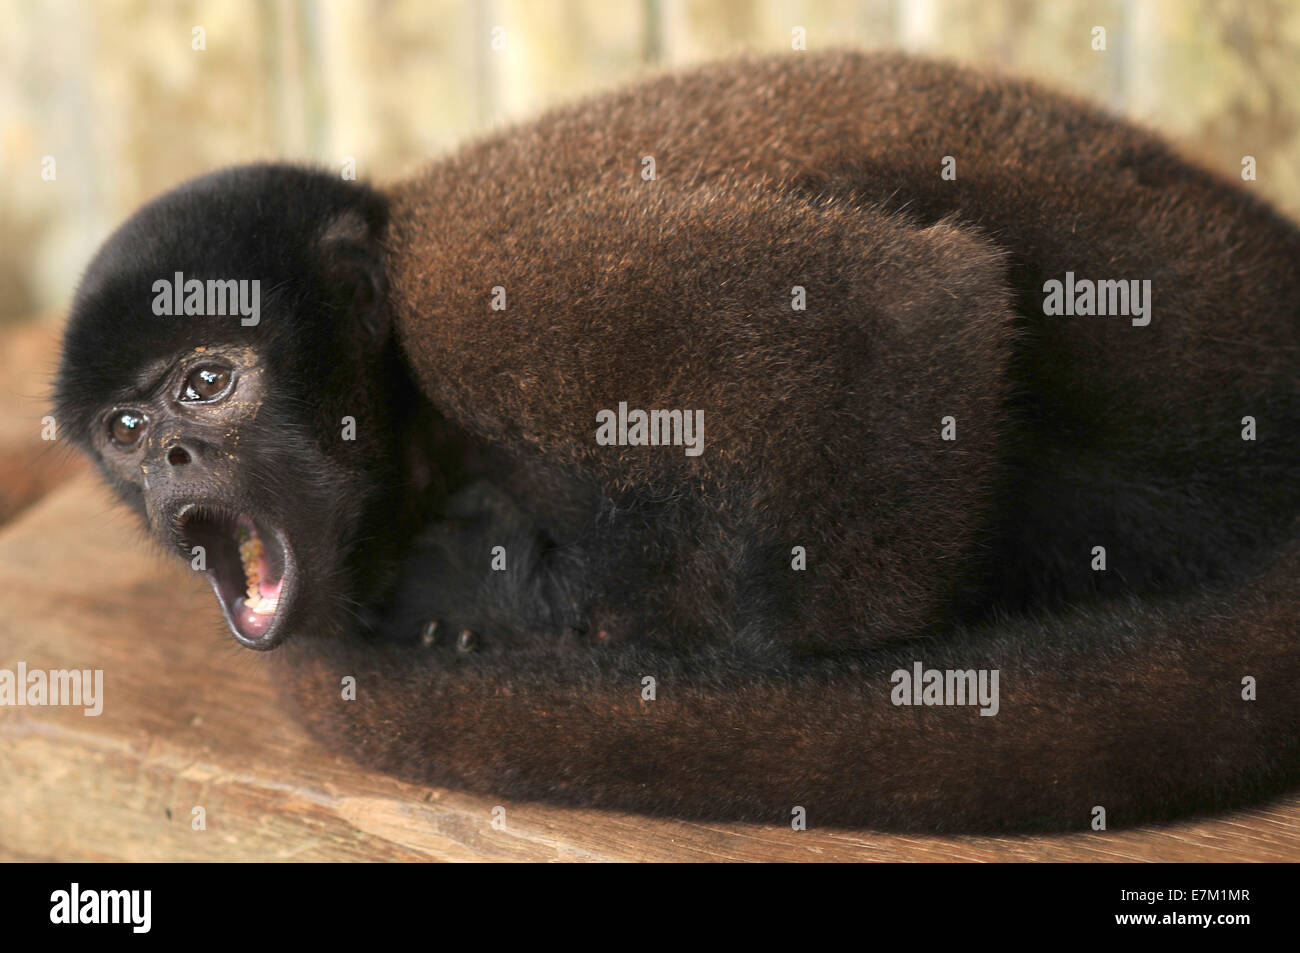 Wooly monkey being maintained in captivity, Ecuador Stock Photo